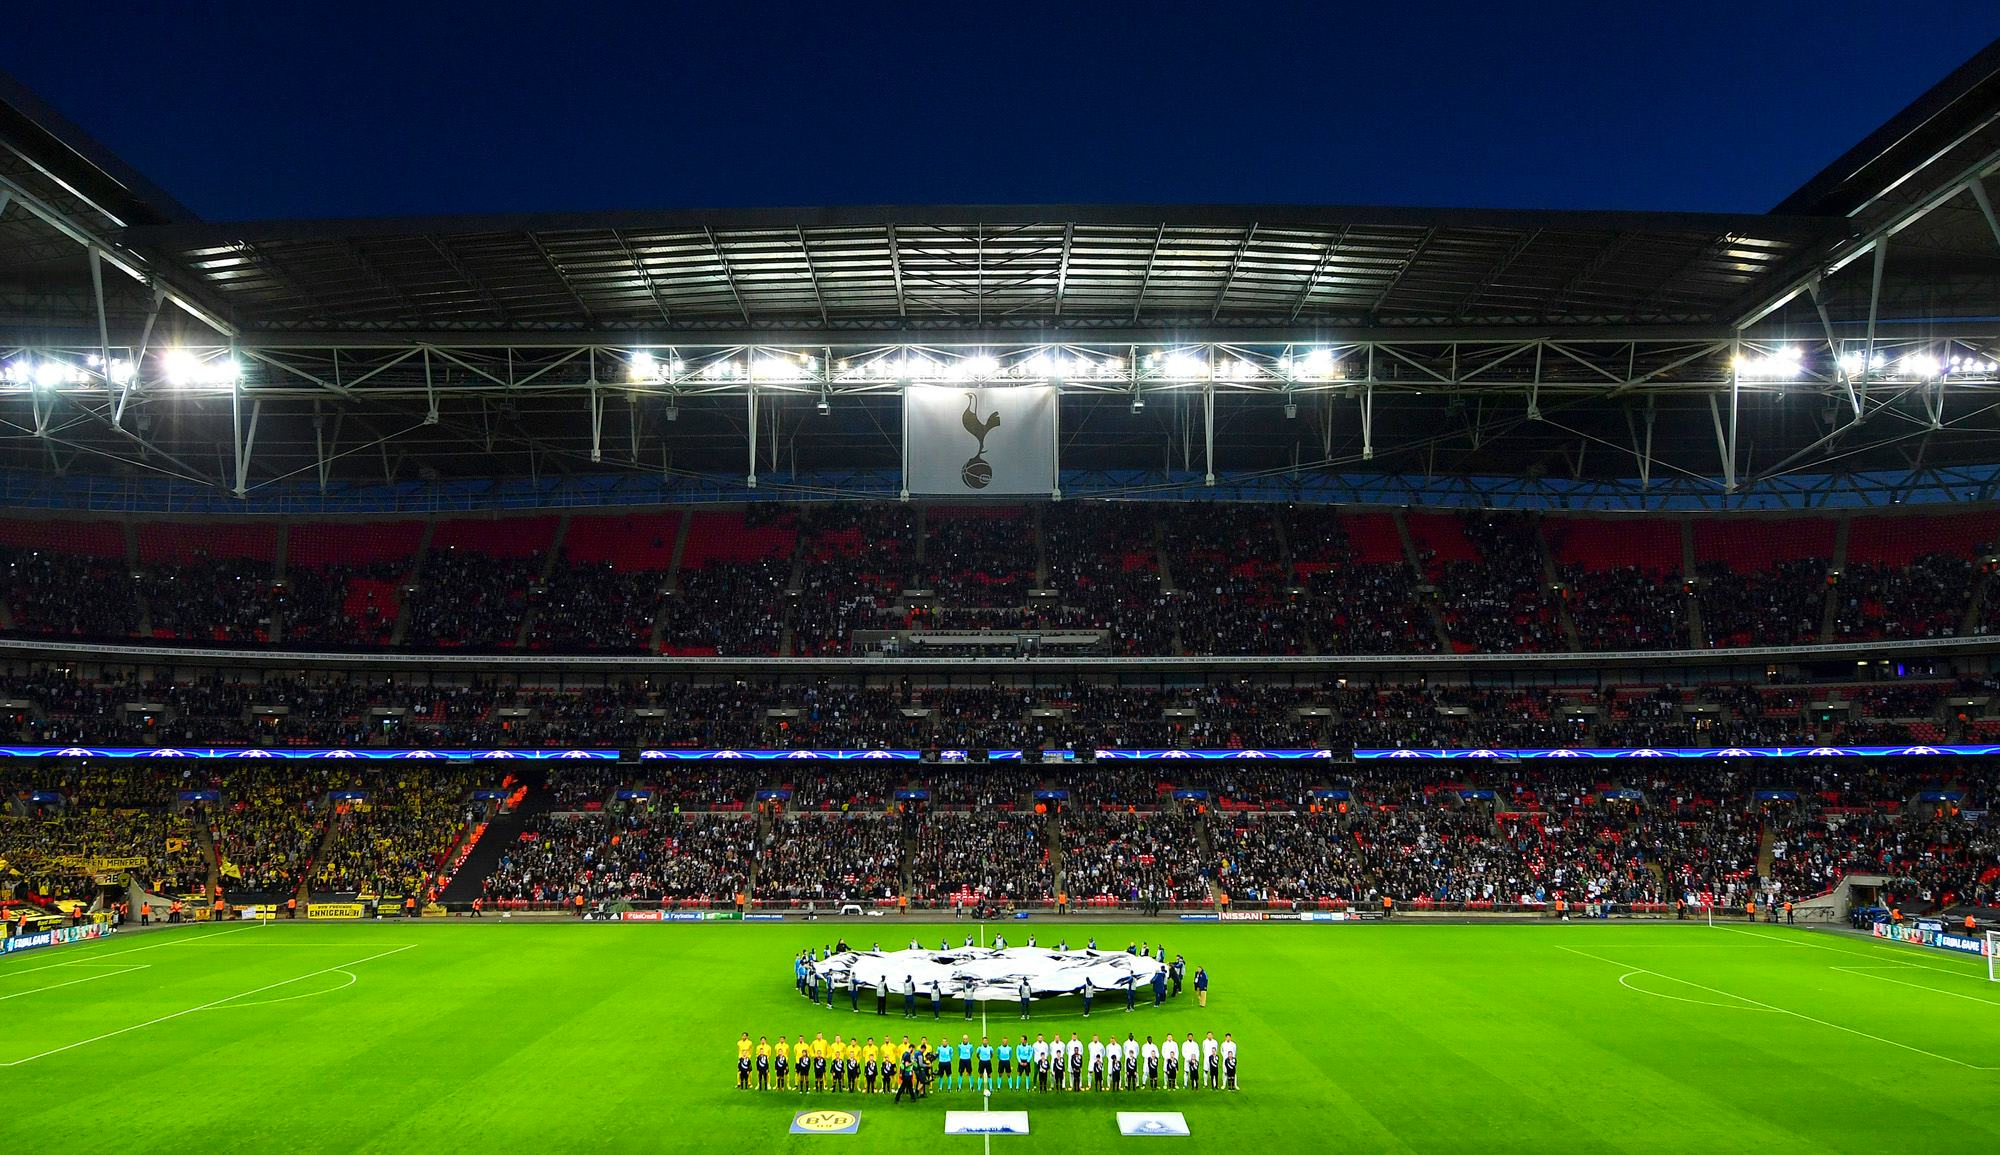 Win two places in an Executive Box at a Spurs’ Champions League game football pitch uk